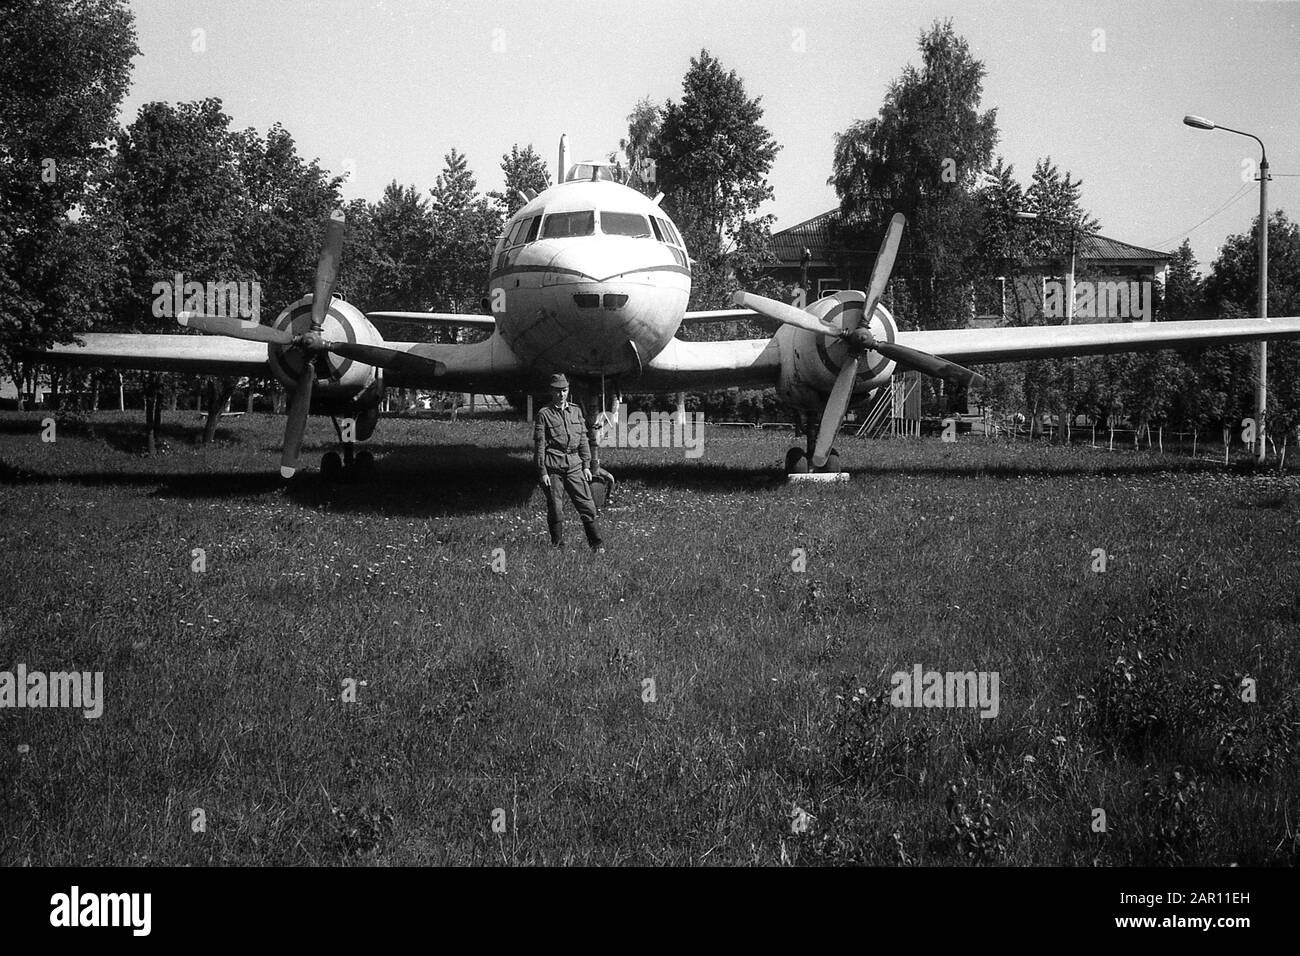 STUPINO, MOSCOW REGION, RUSSIA - CIRCA 1992: A soldier of the Russian army on the background of a Soviet twin-engine military cargo transport aircraft Ilyushin Il-14. Black and white. Film scan. Large grain. Stock Photo